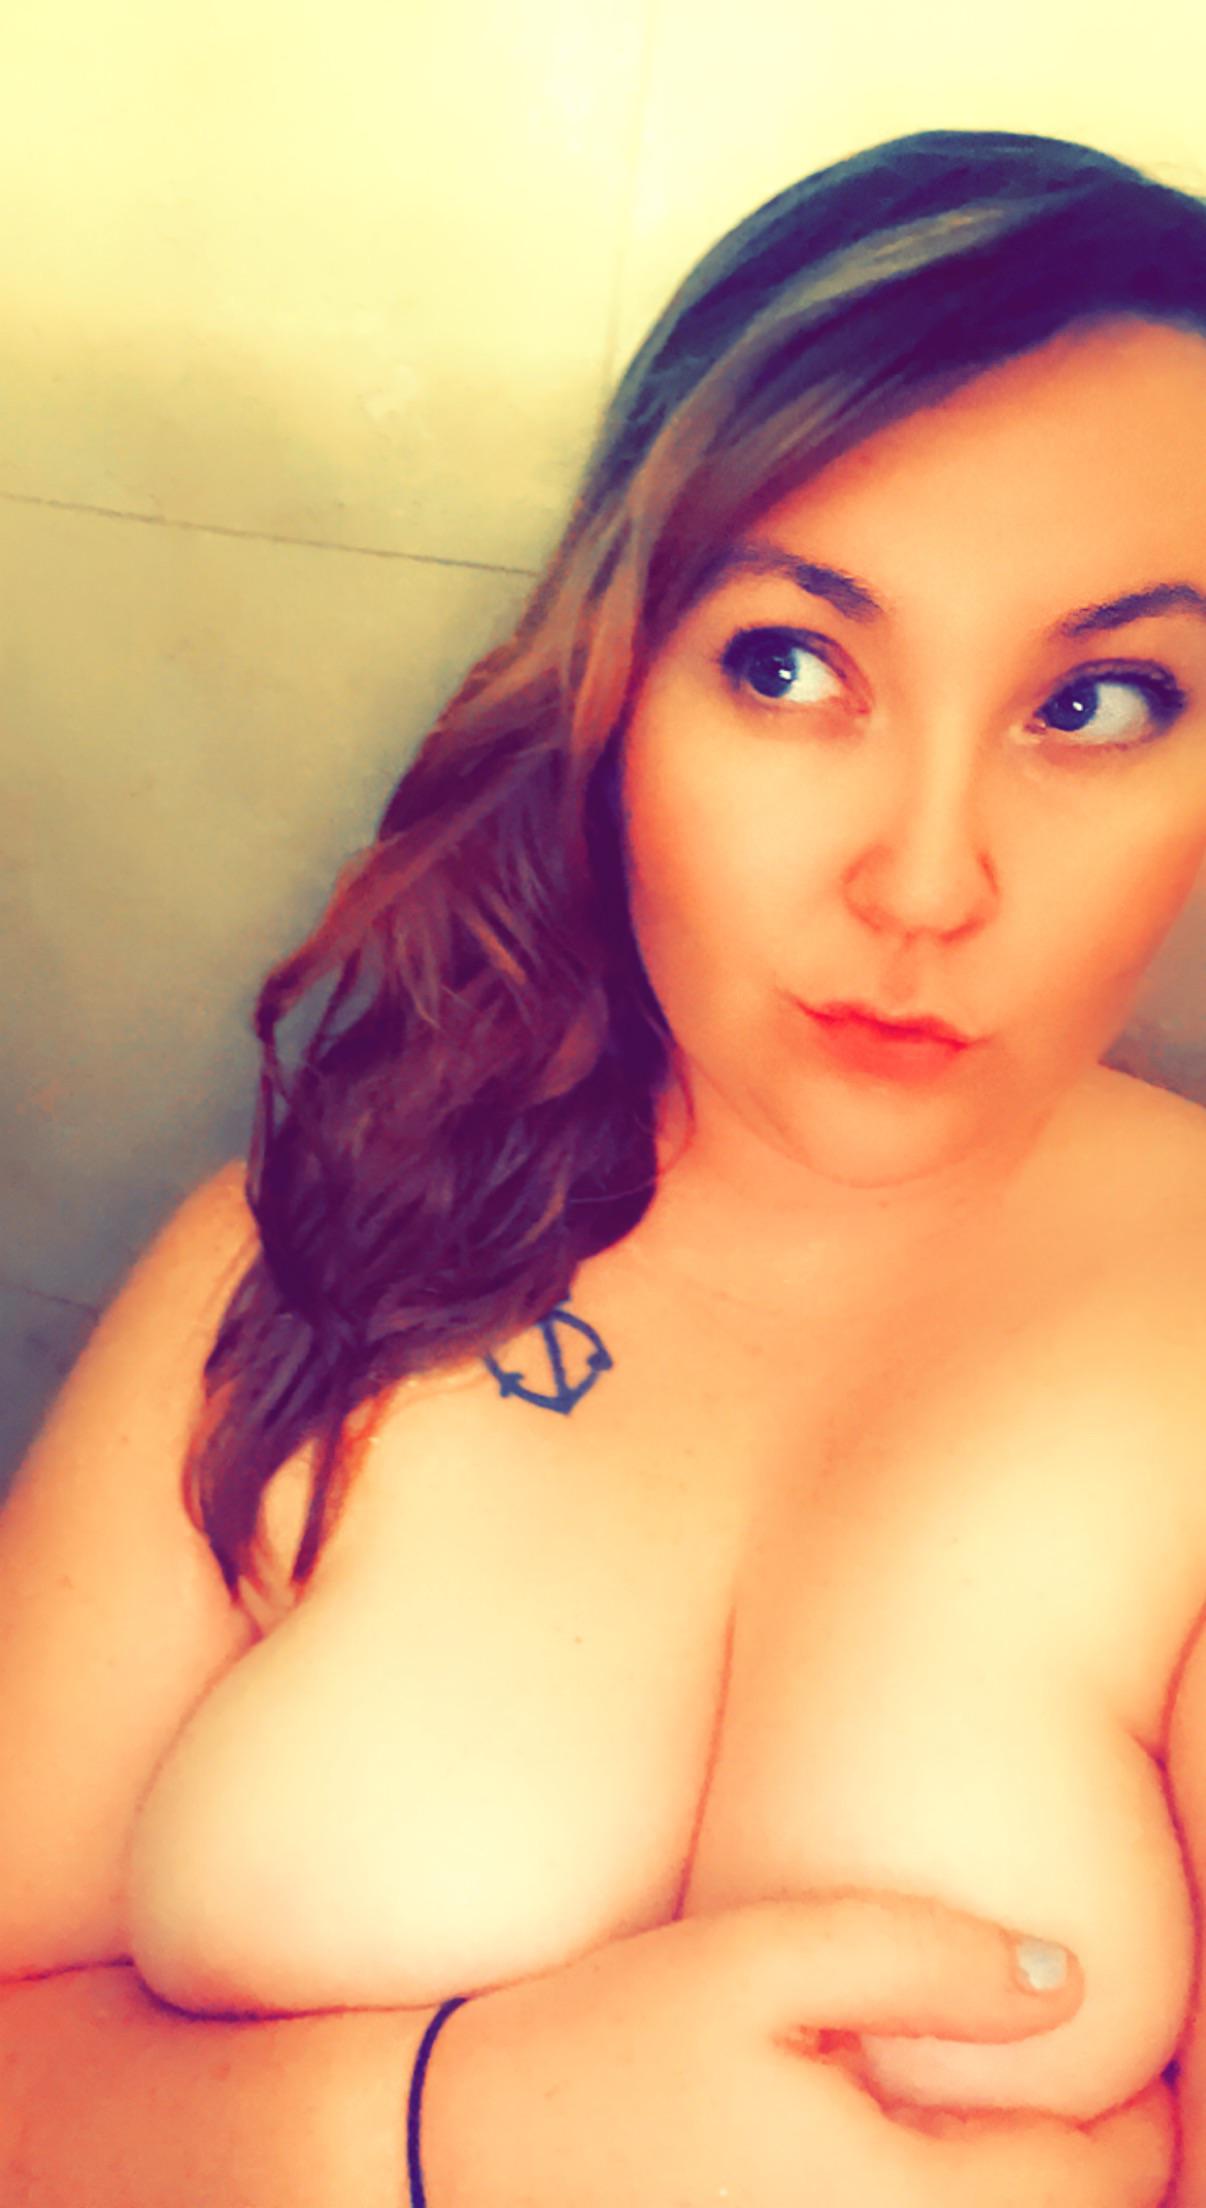 Come help me wash these titties in the shower